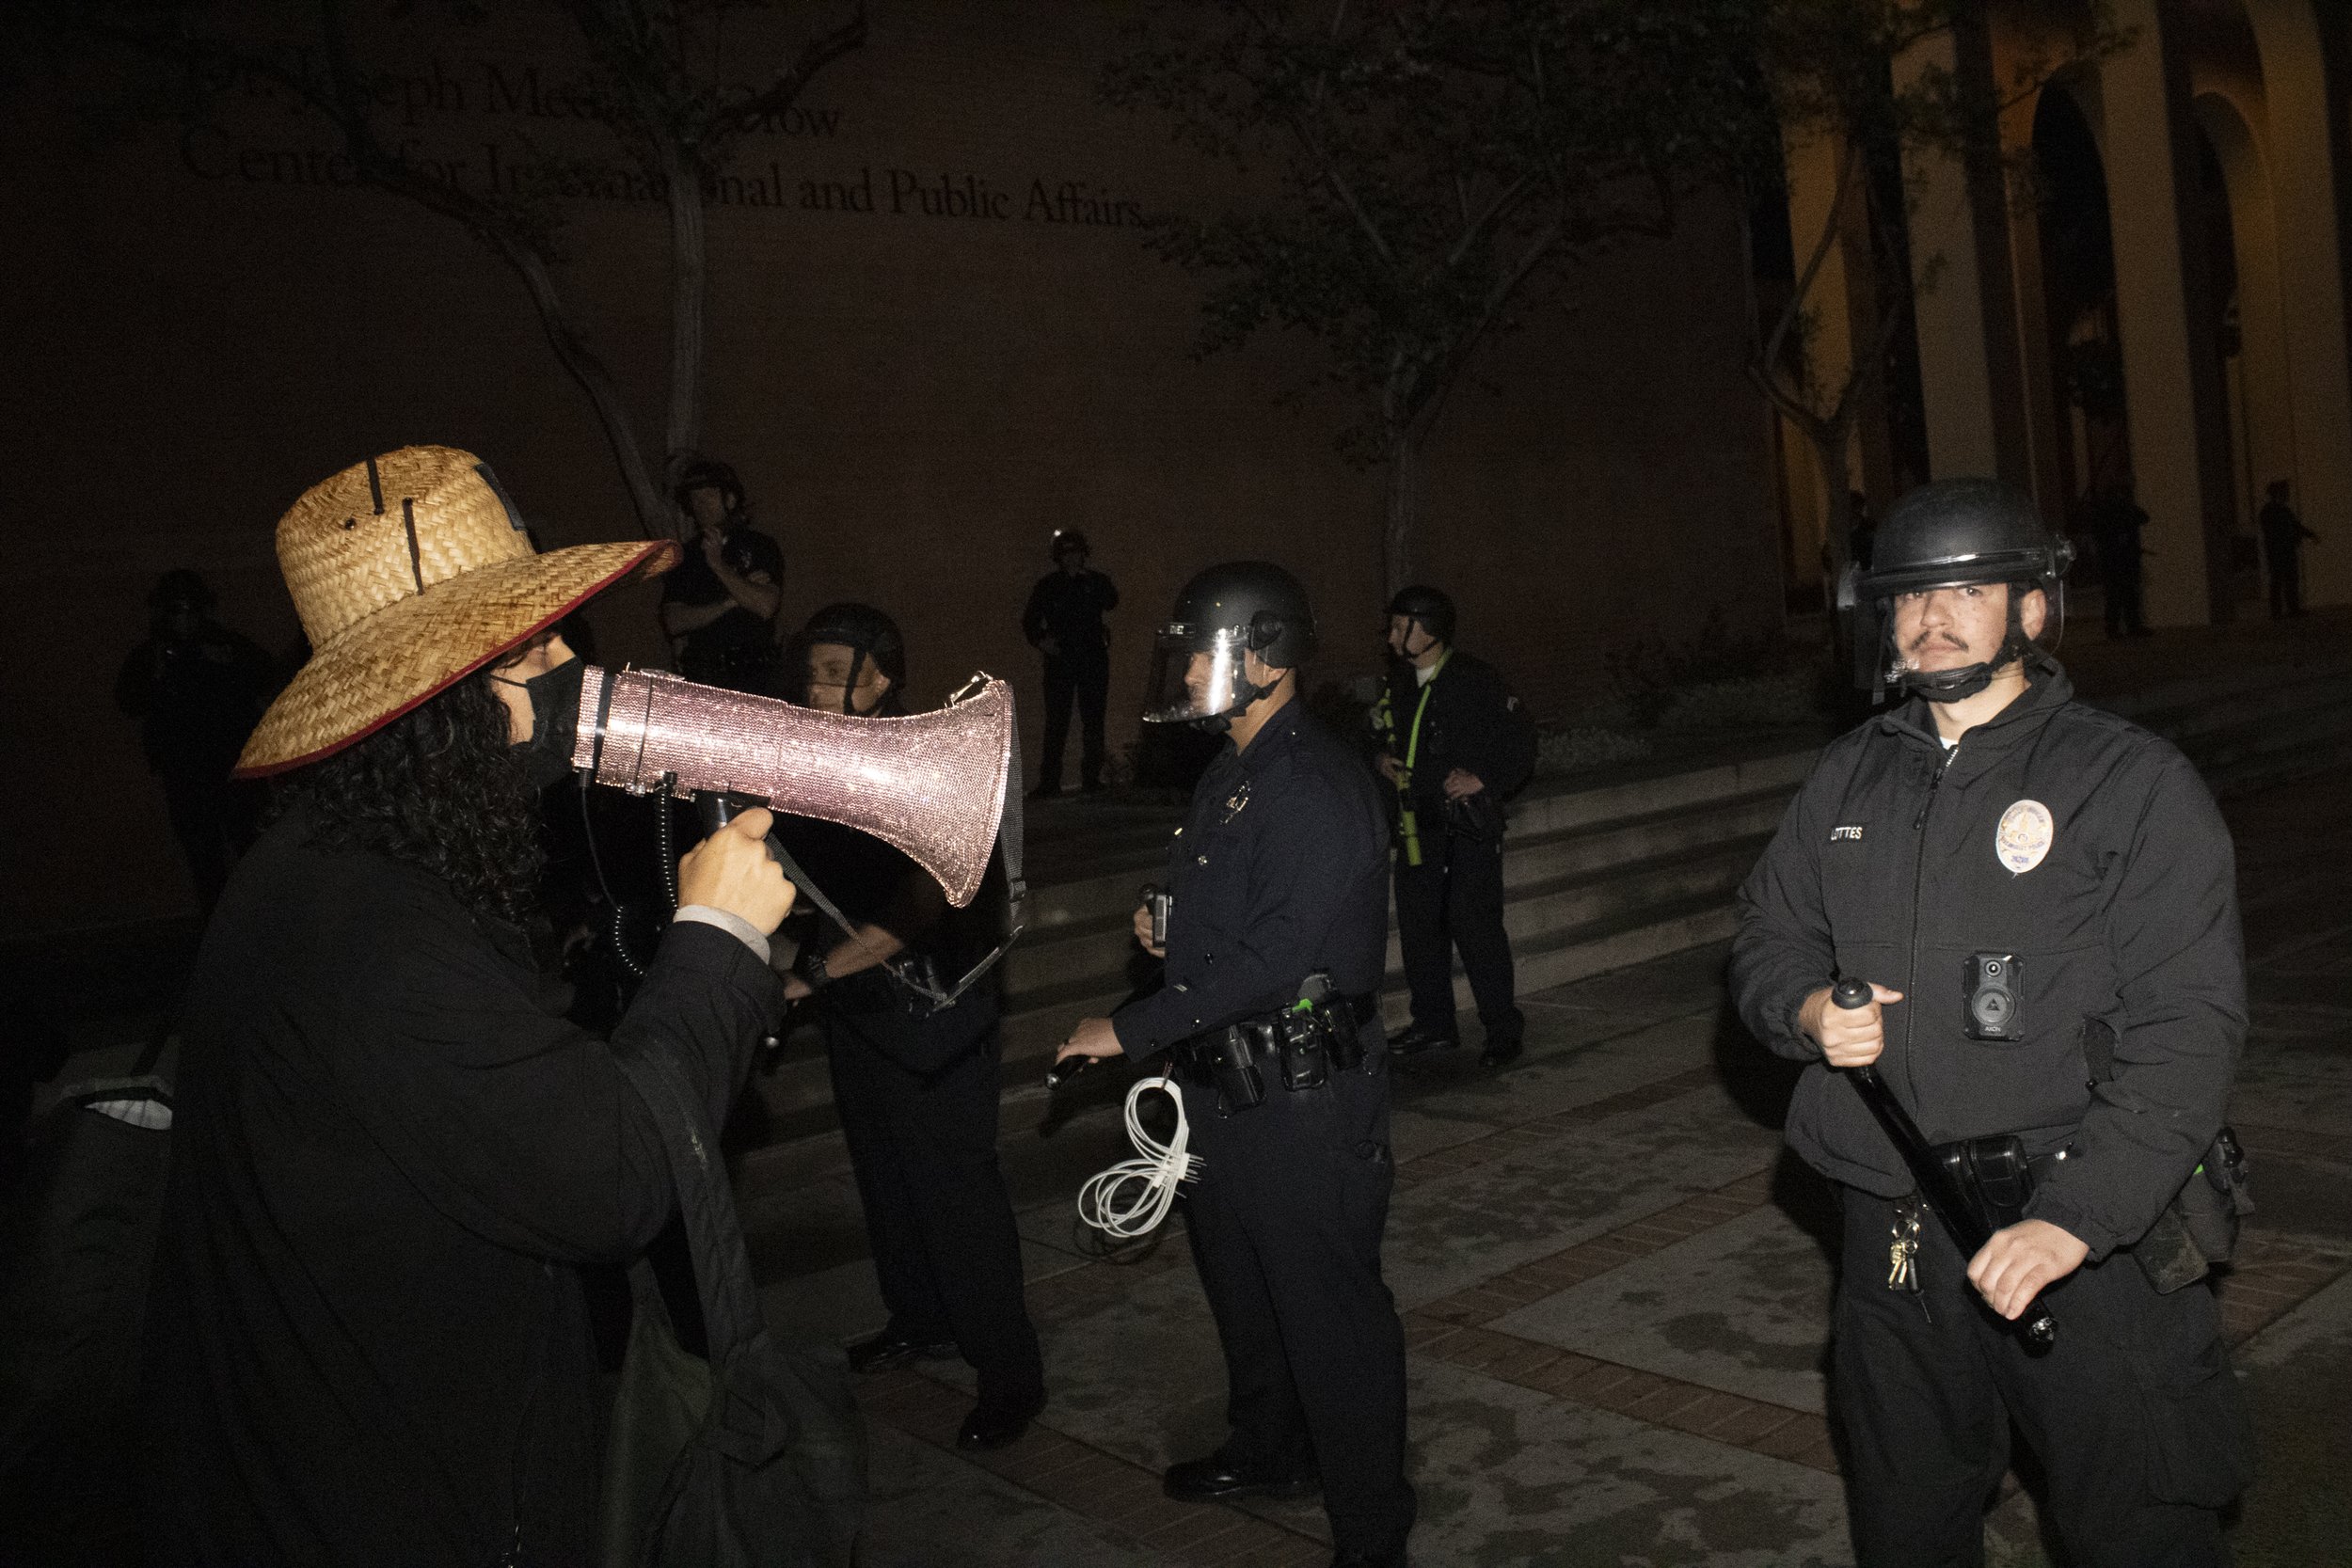  A protester from the University of Southern California Divest from Death coalition chants into his microphone “Disclose. Divest. We will not stop. We will not Rest,” in front of the University of Southern California Department of Security after bein